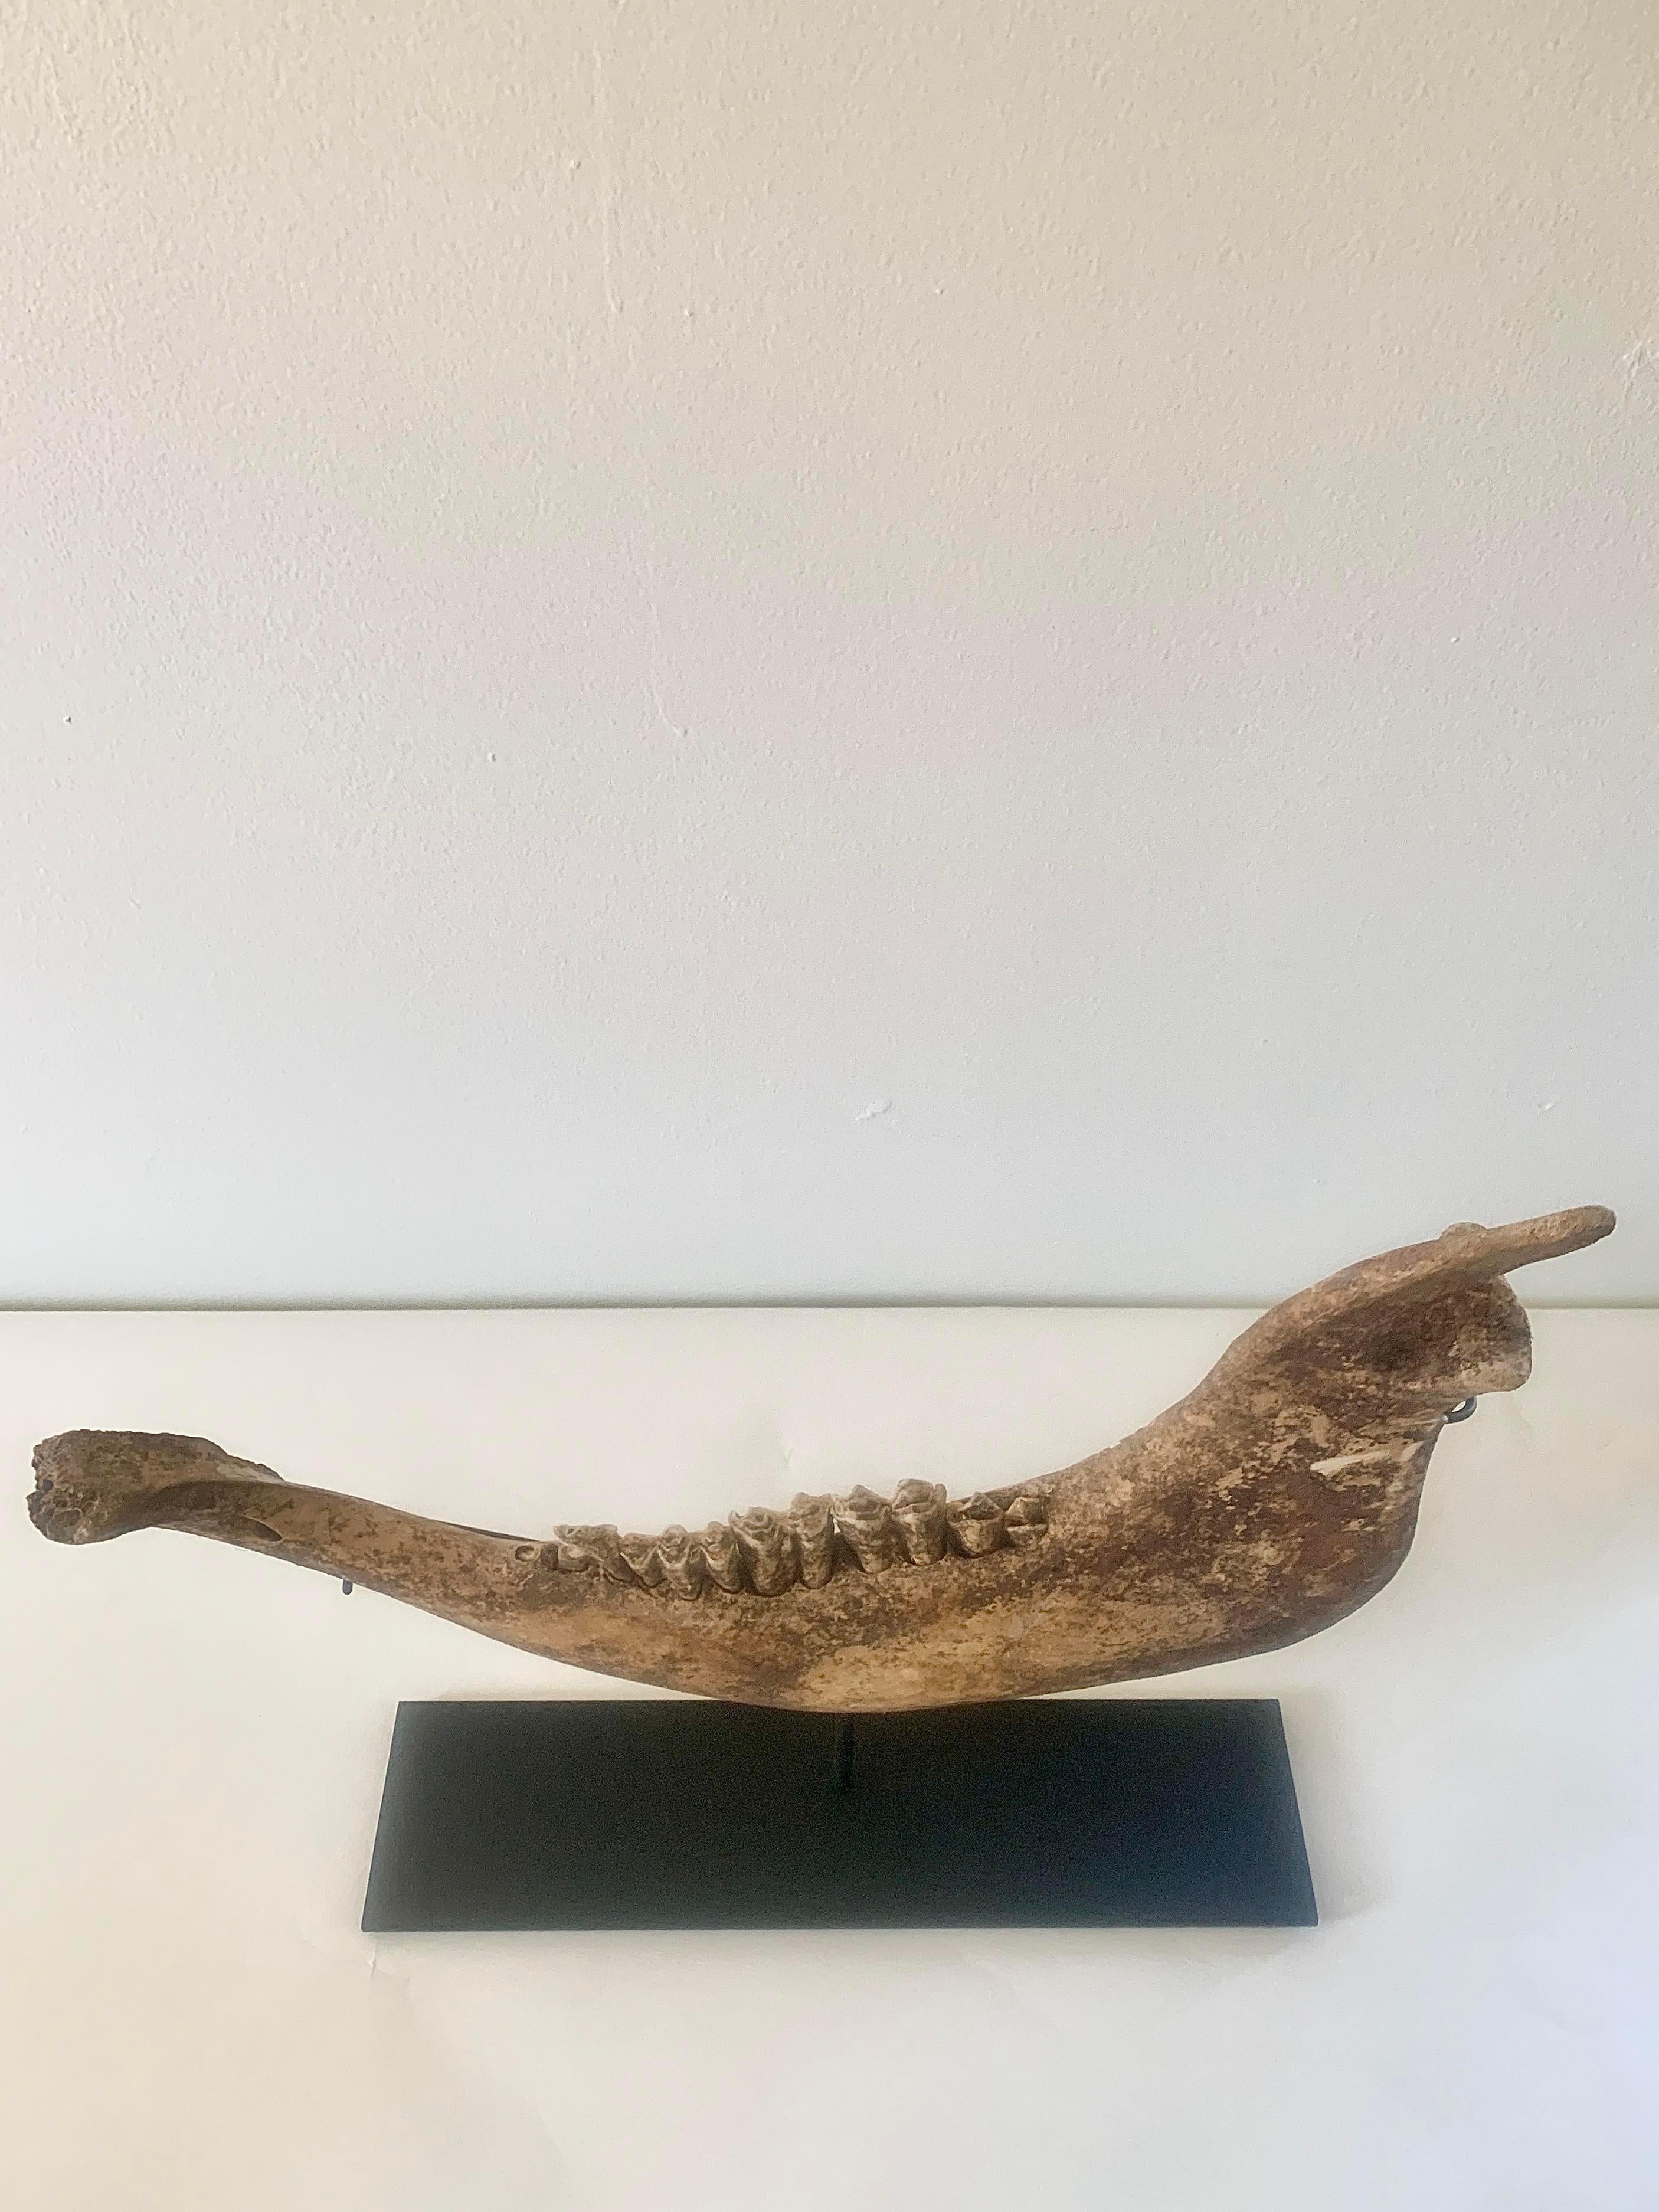 A vintage cow jaw mounted on a custom black steel stand, perfect for the curiosity cabinet.

USA, Mid-20th century

Measures: 14.75